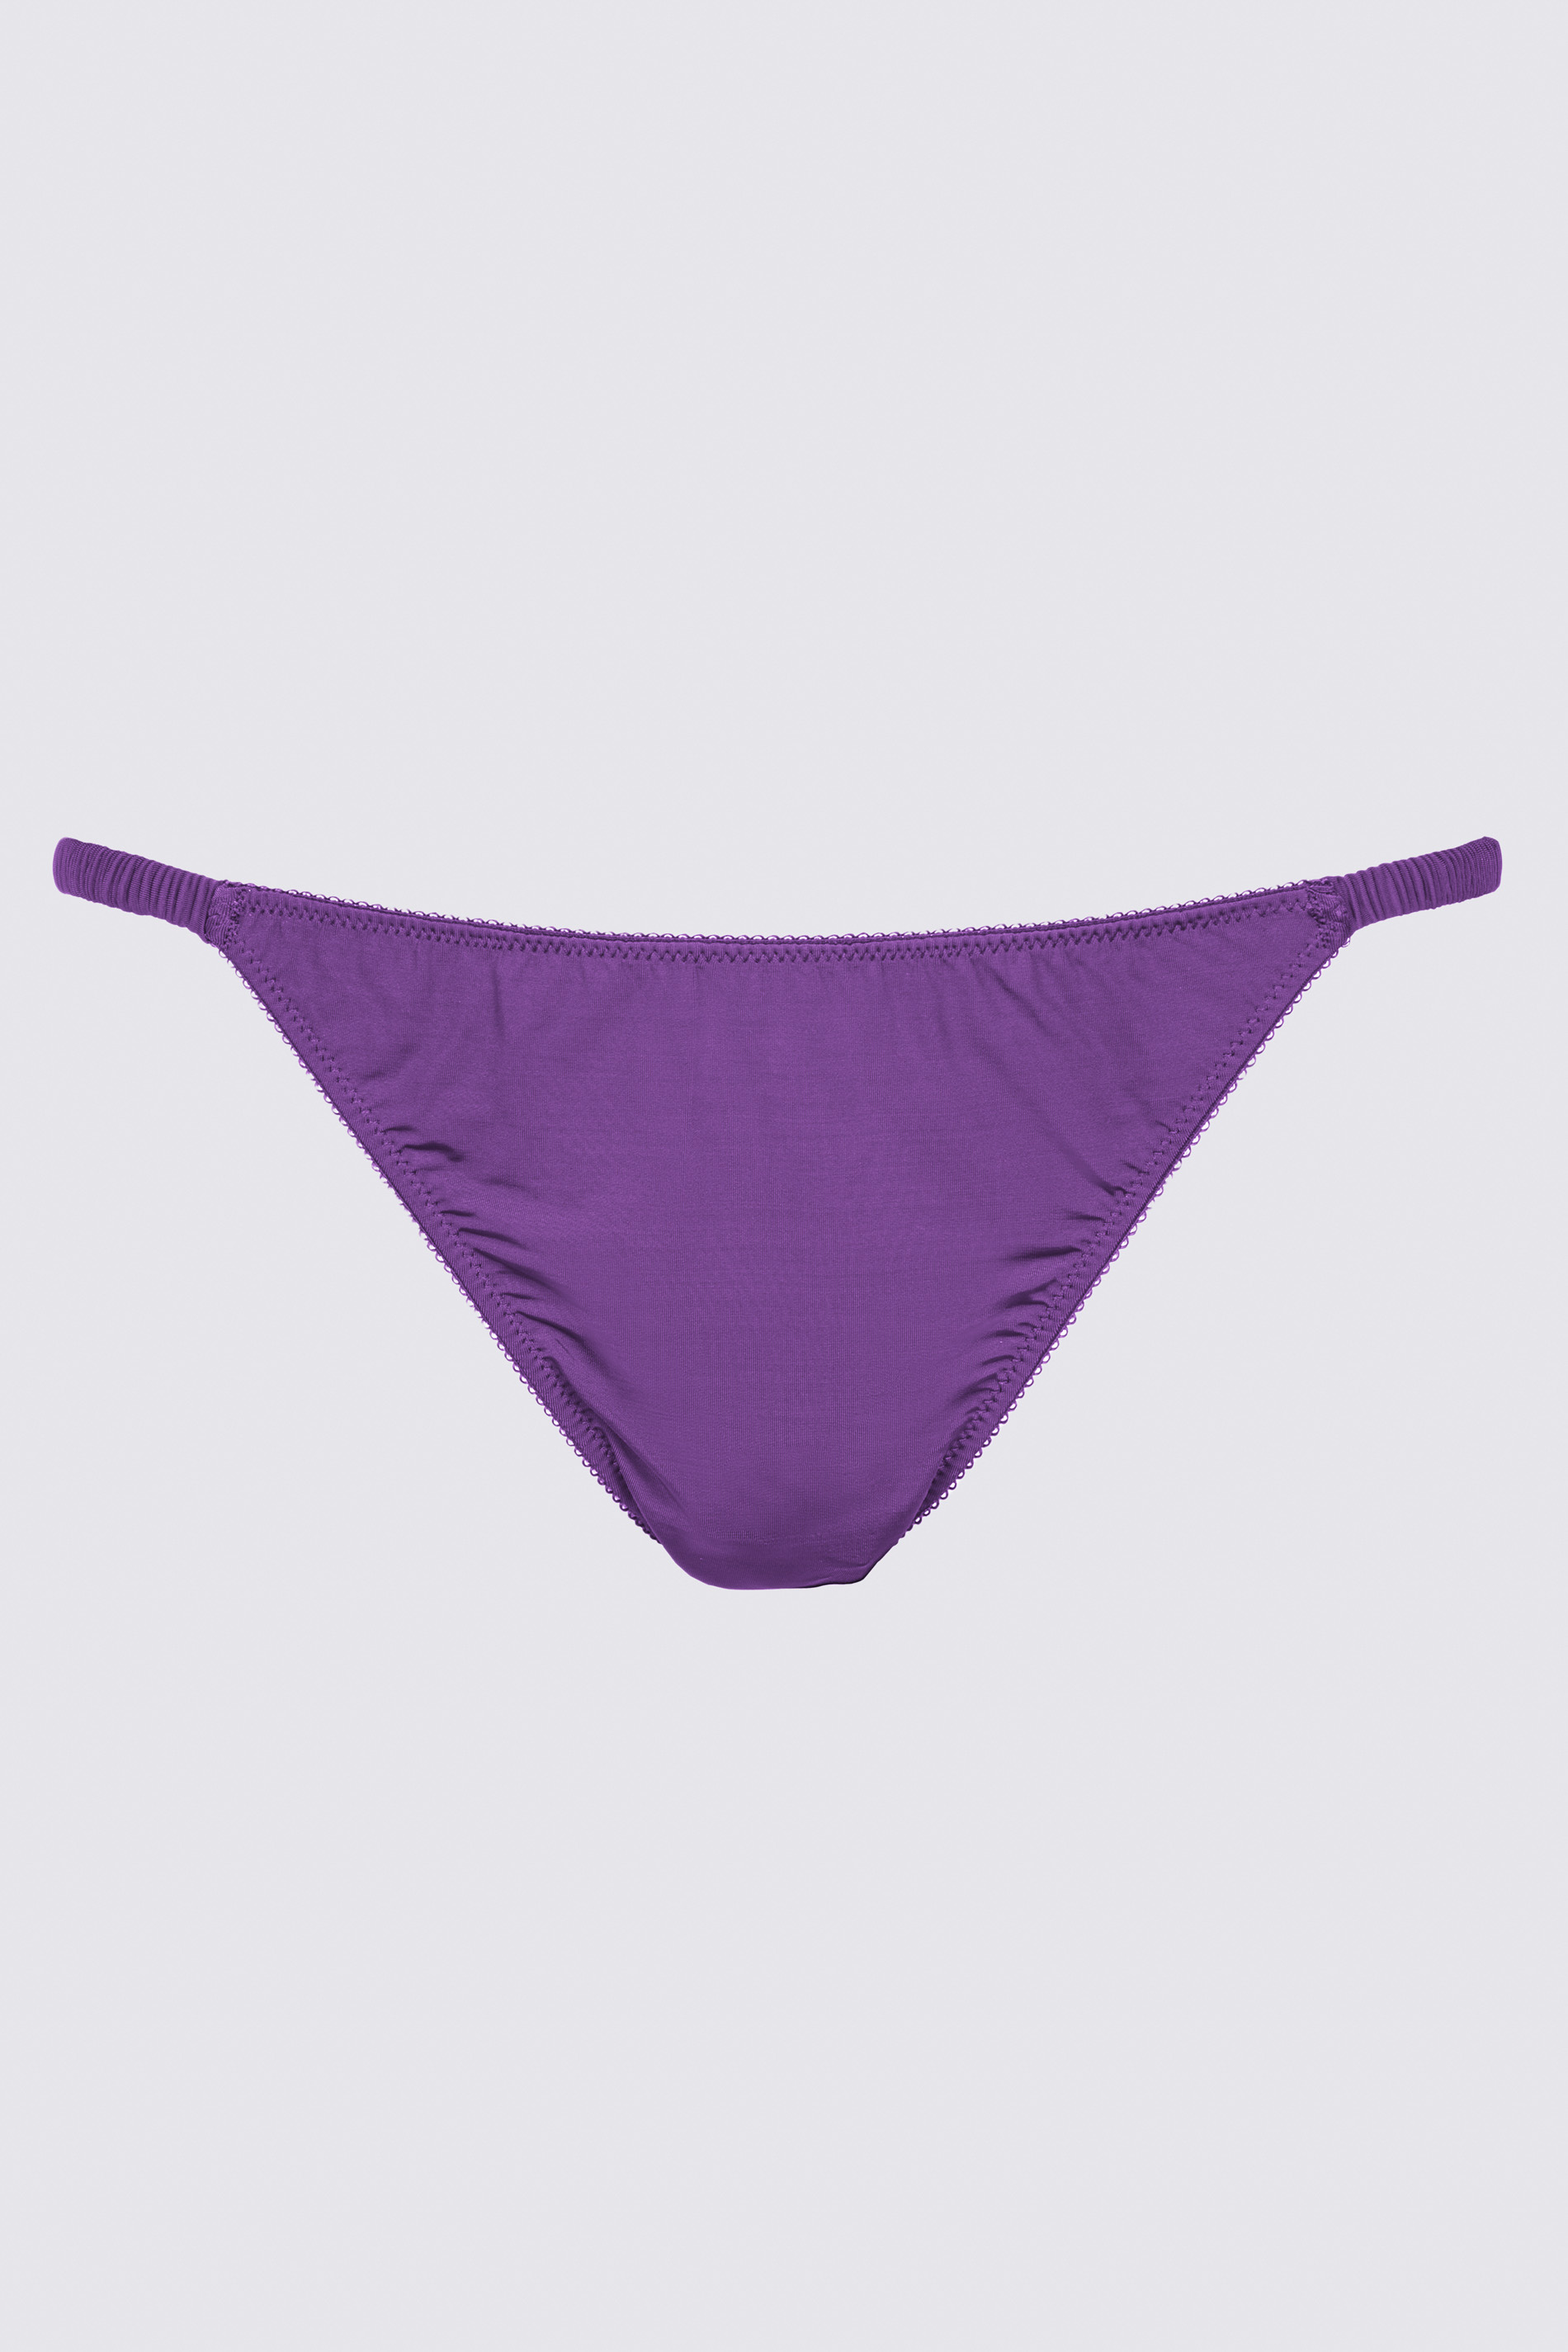 Tanga Fresh Plum Serie Poetry Classy Uitknippen | mey®